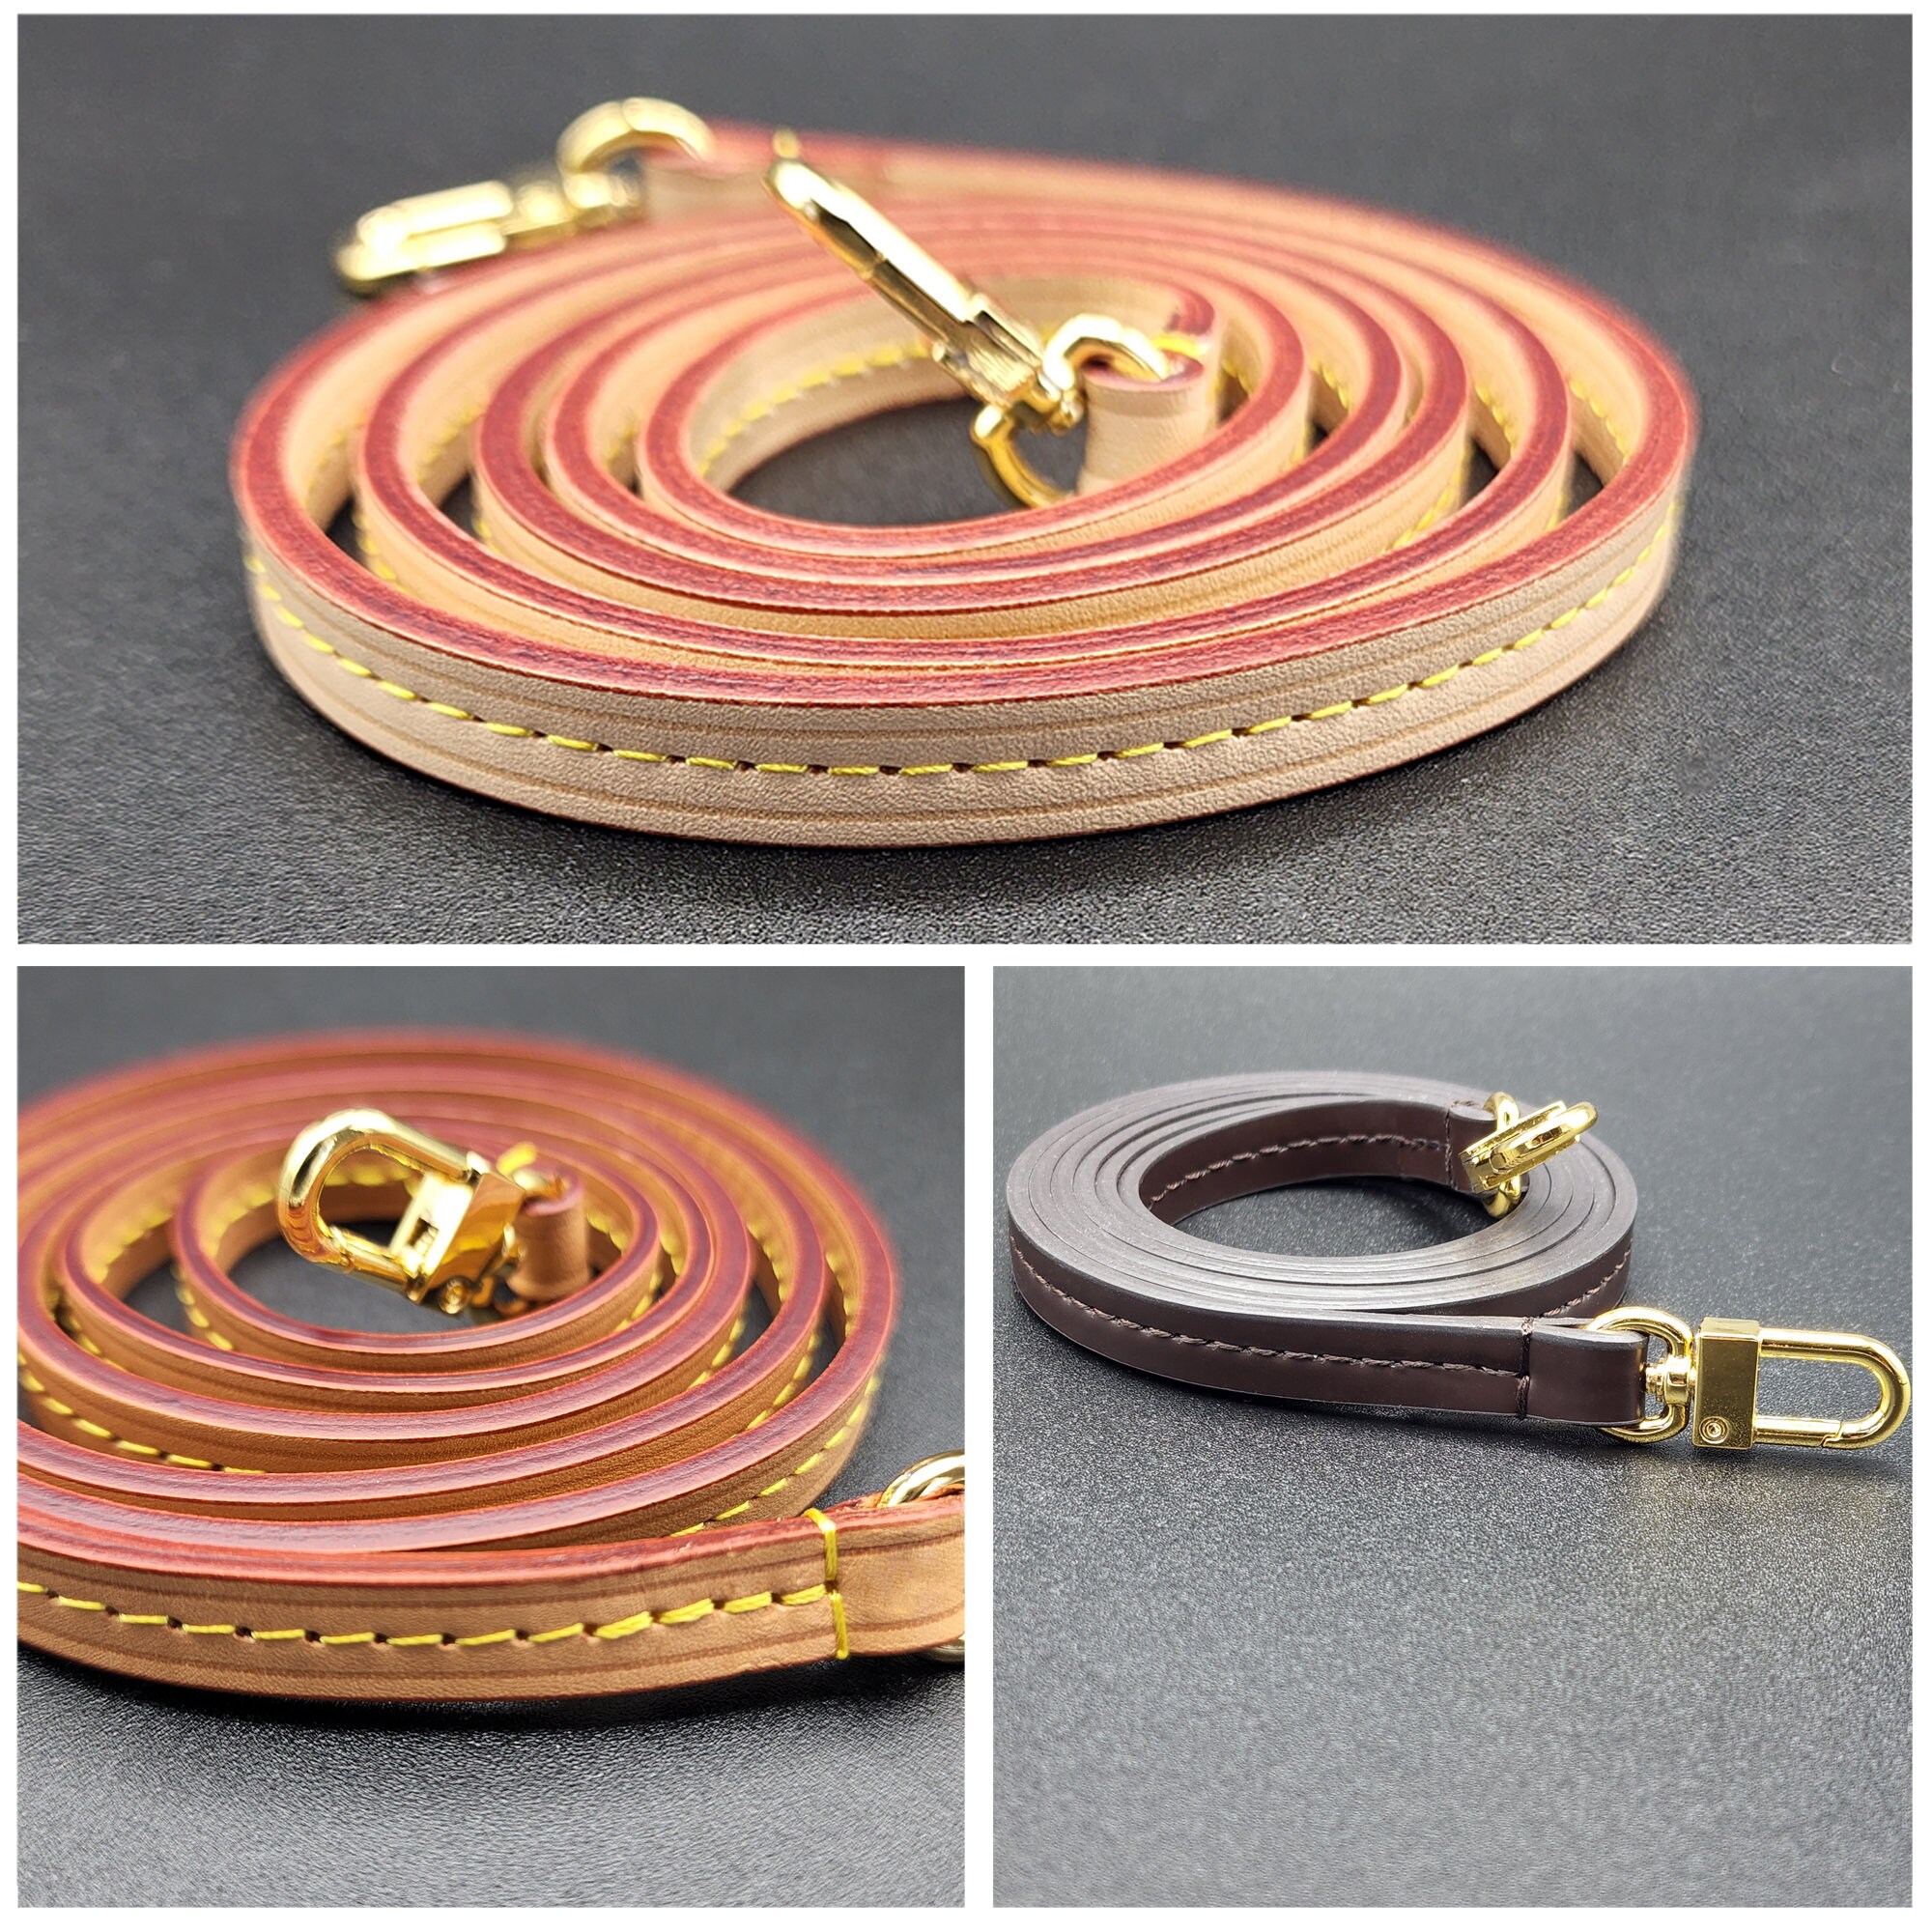 Braided Vachetta Leather Strap with 24K Gold Plated Hardwares, for Handbags, Bucket Bags, Neo NM/BB, Customized Should/Crossbody Strap